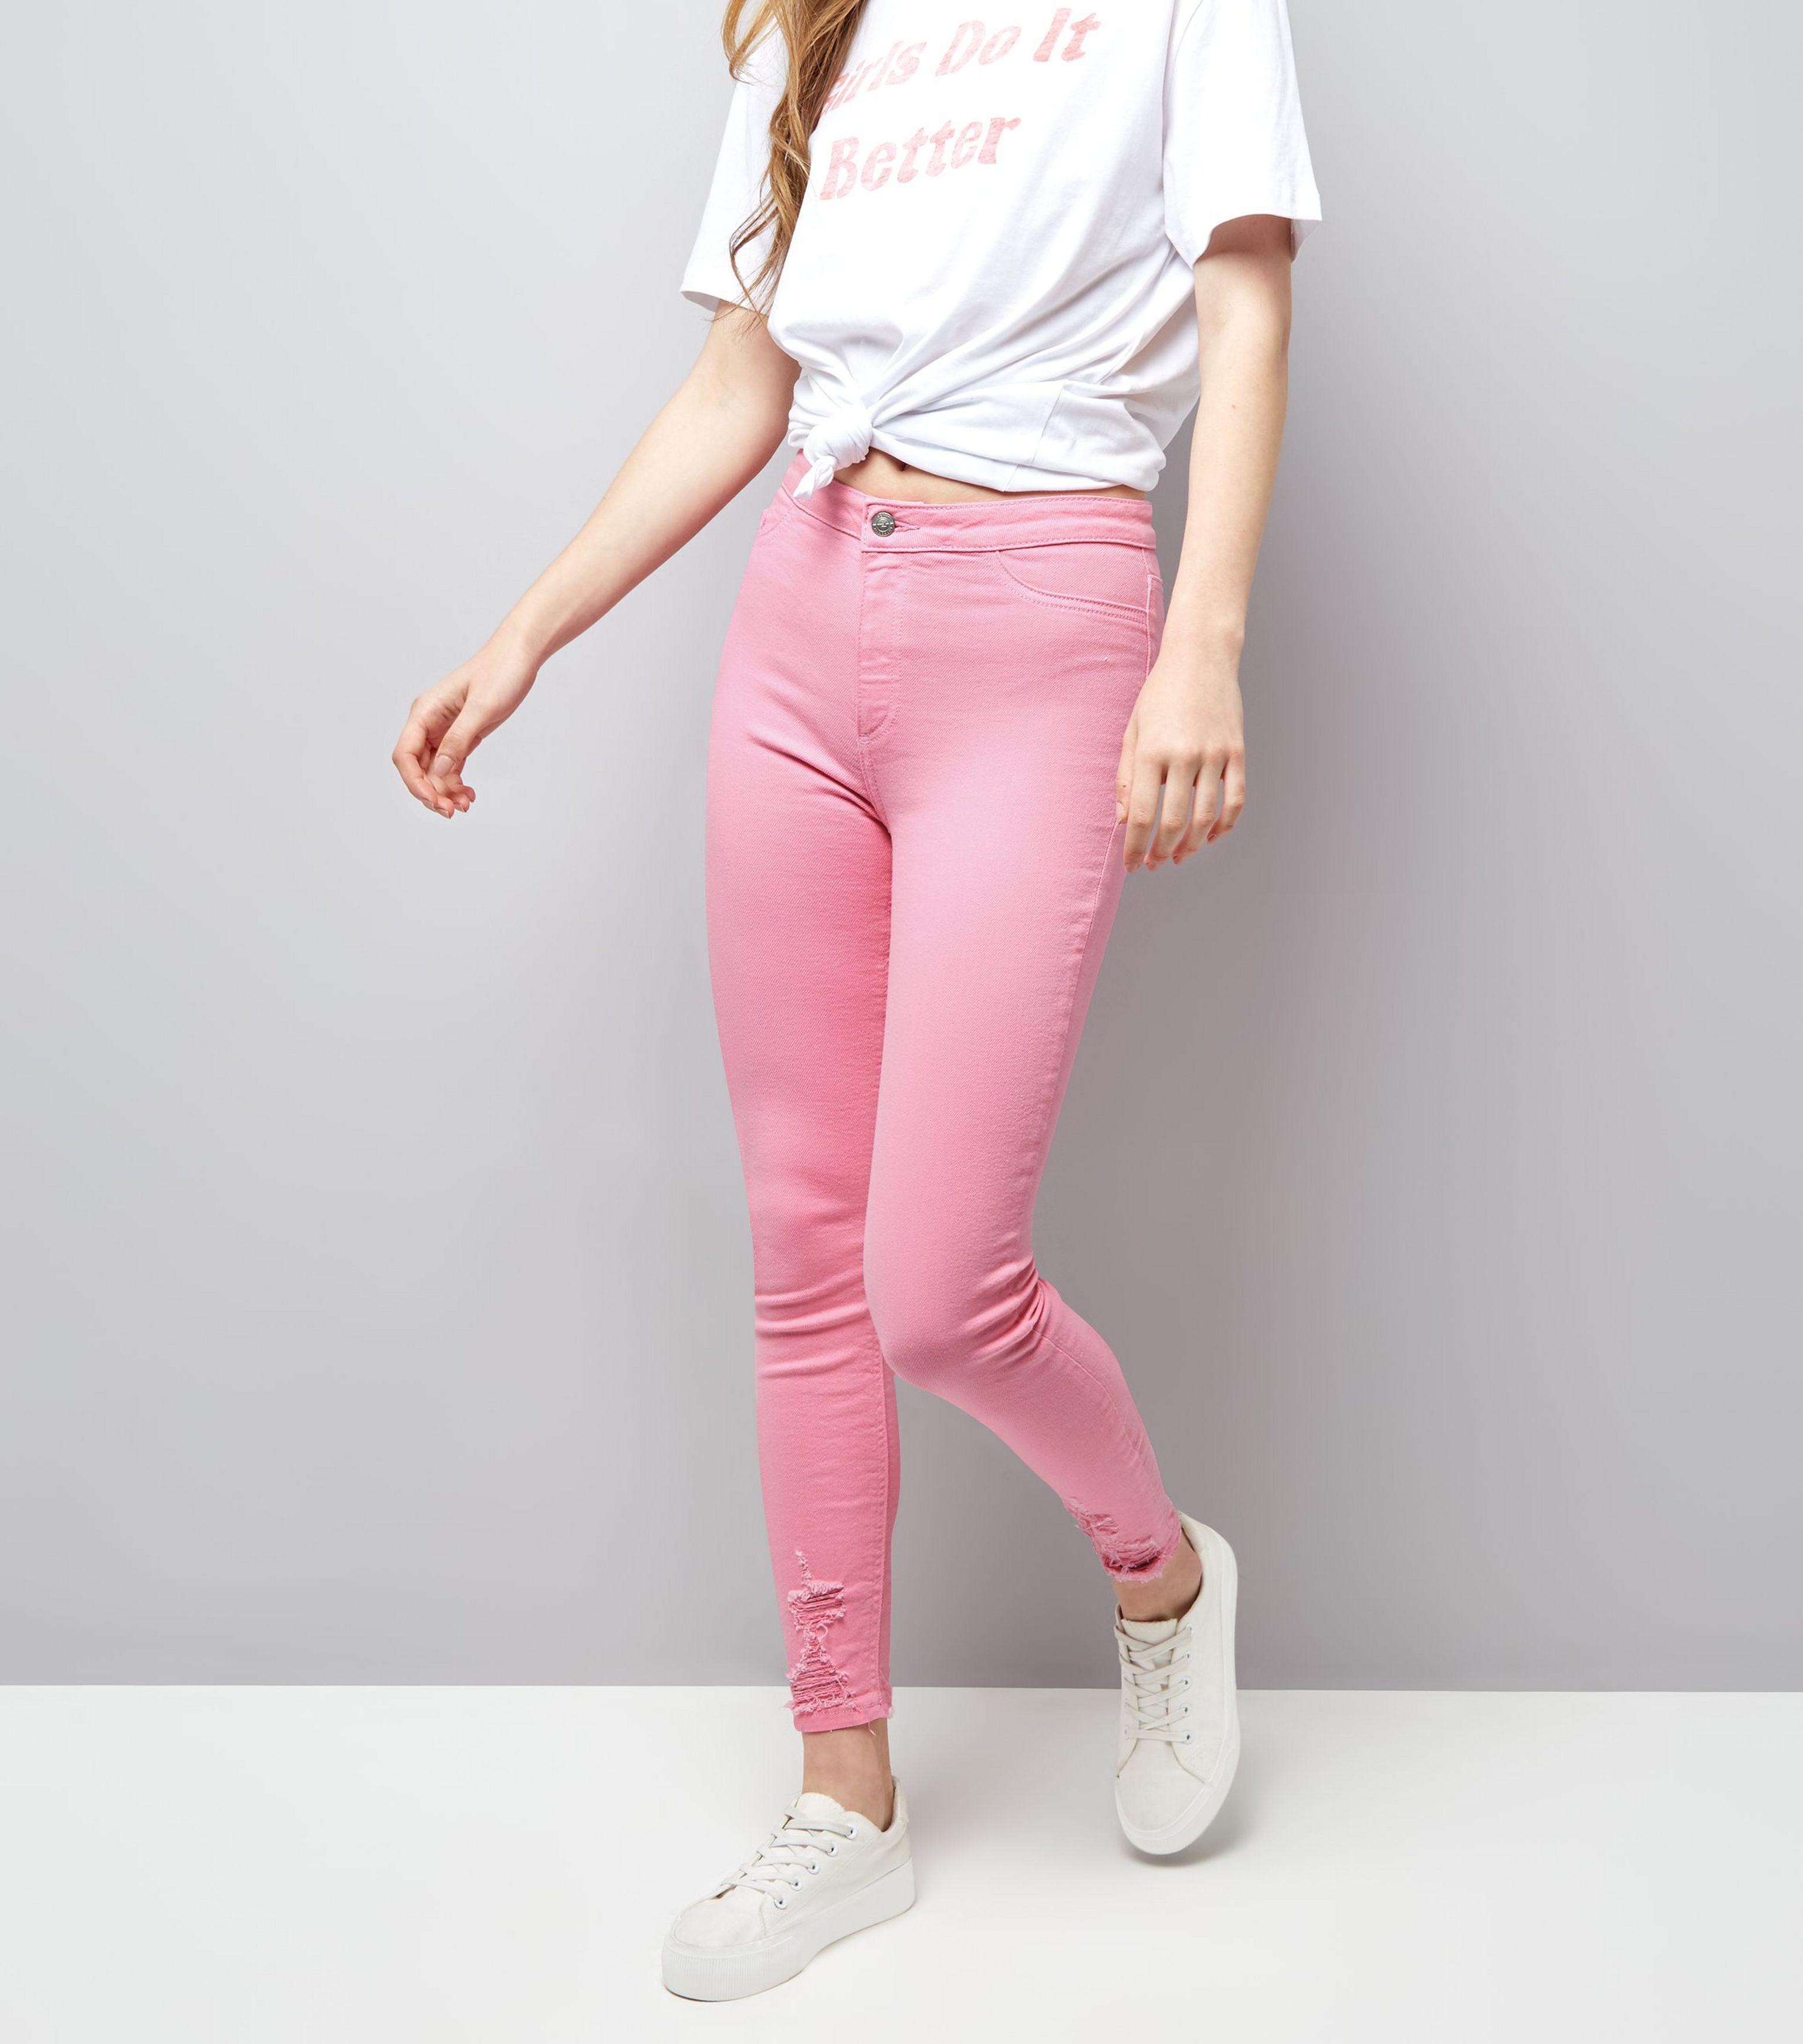 pink jeans new look